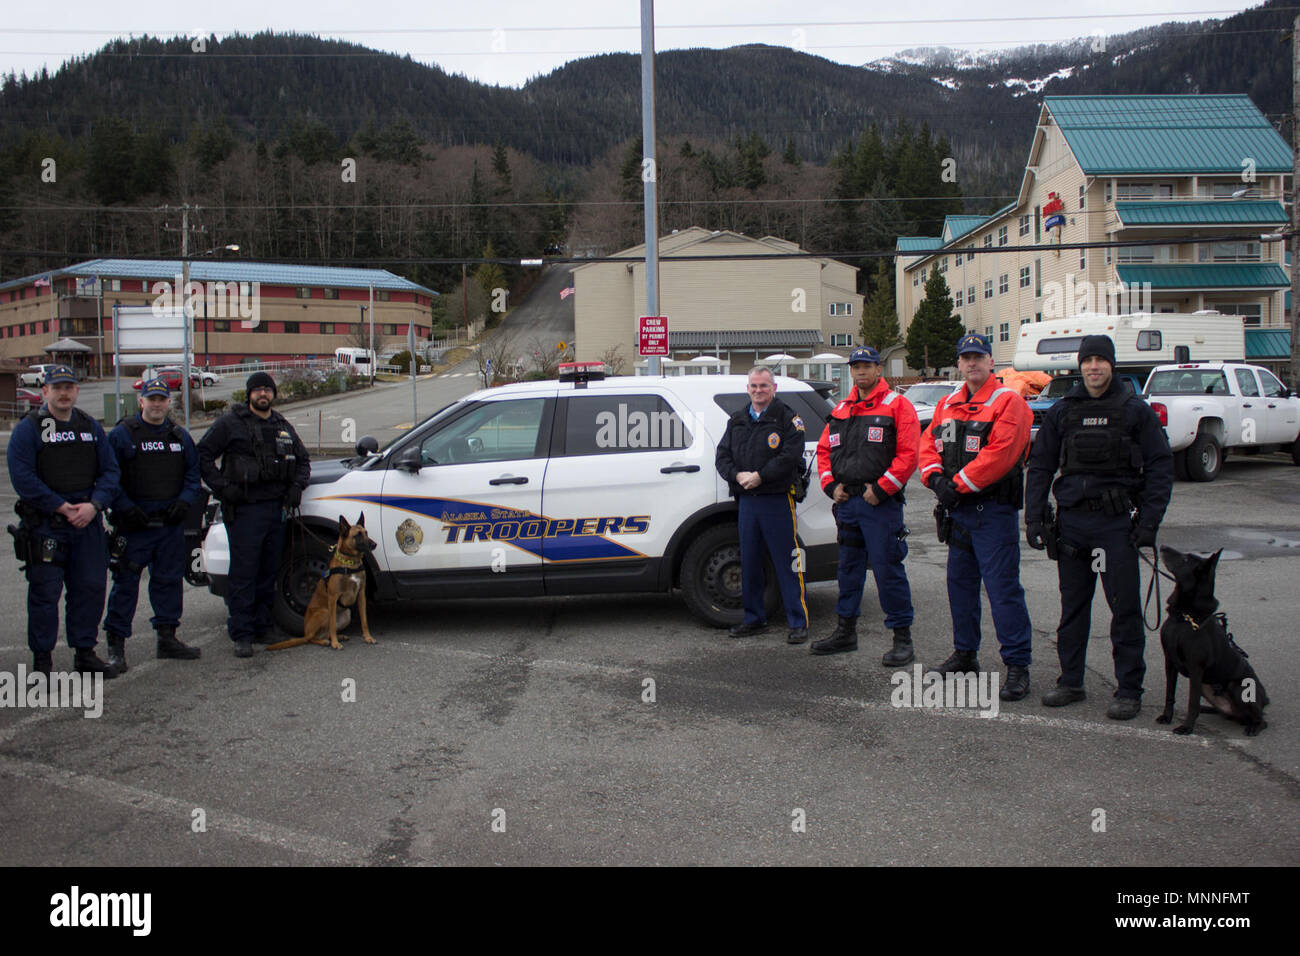 Members of the Coast Guard and Alaska State Troopers pose together following the completion of a joint law enforcement operation at the Alaska Marine Highway System ferry terminal in Ketchikan, Alaska, March 11, 2018. The agencies partnered together during the law enforcement operation to detect and deter illegal activity on Alaska's waterways. U.S. Coast Guard Stock Photo